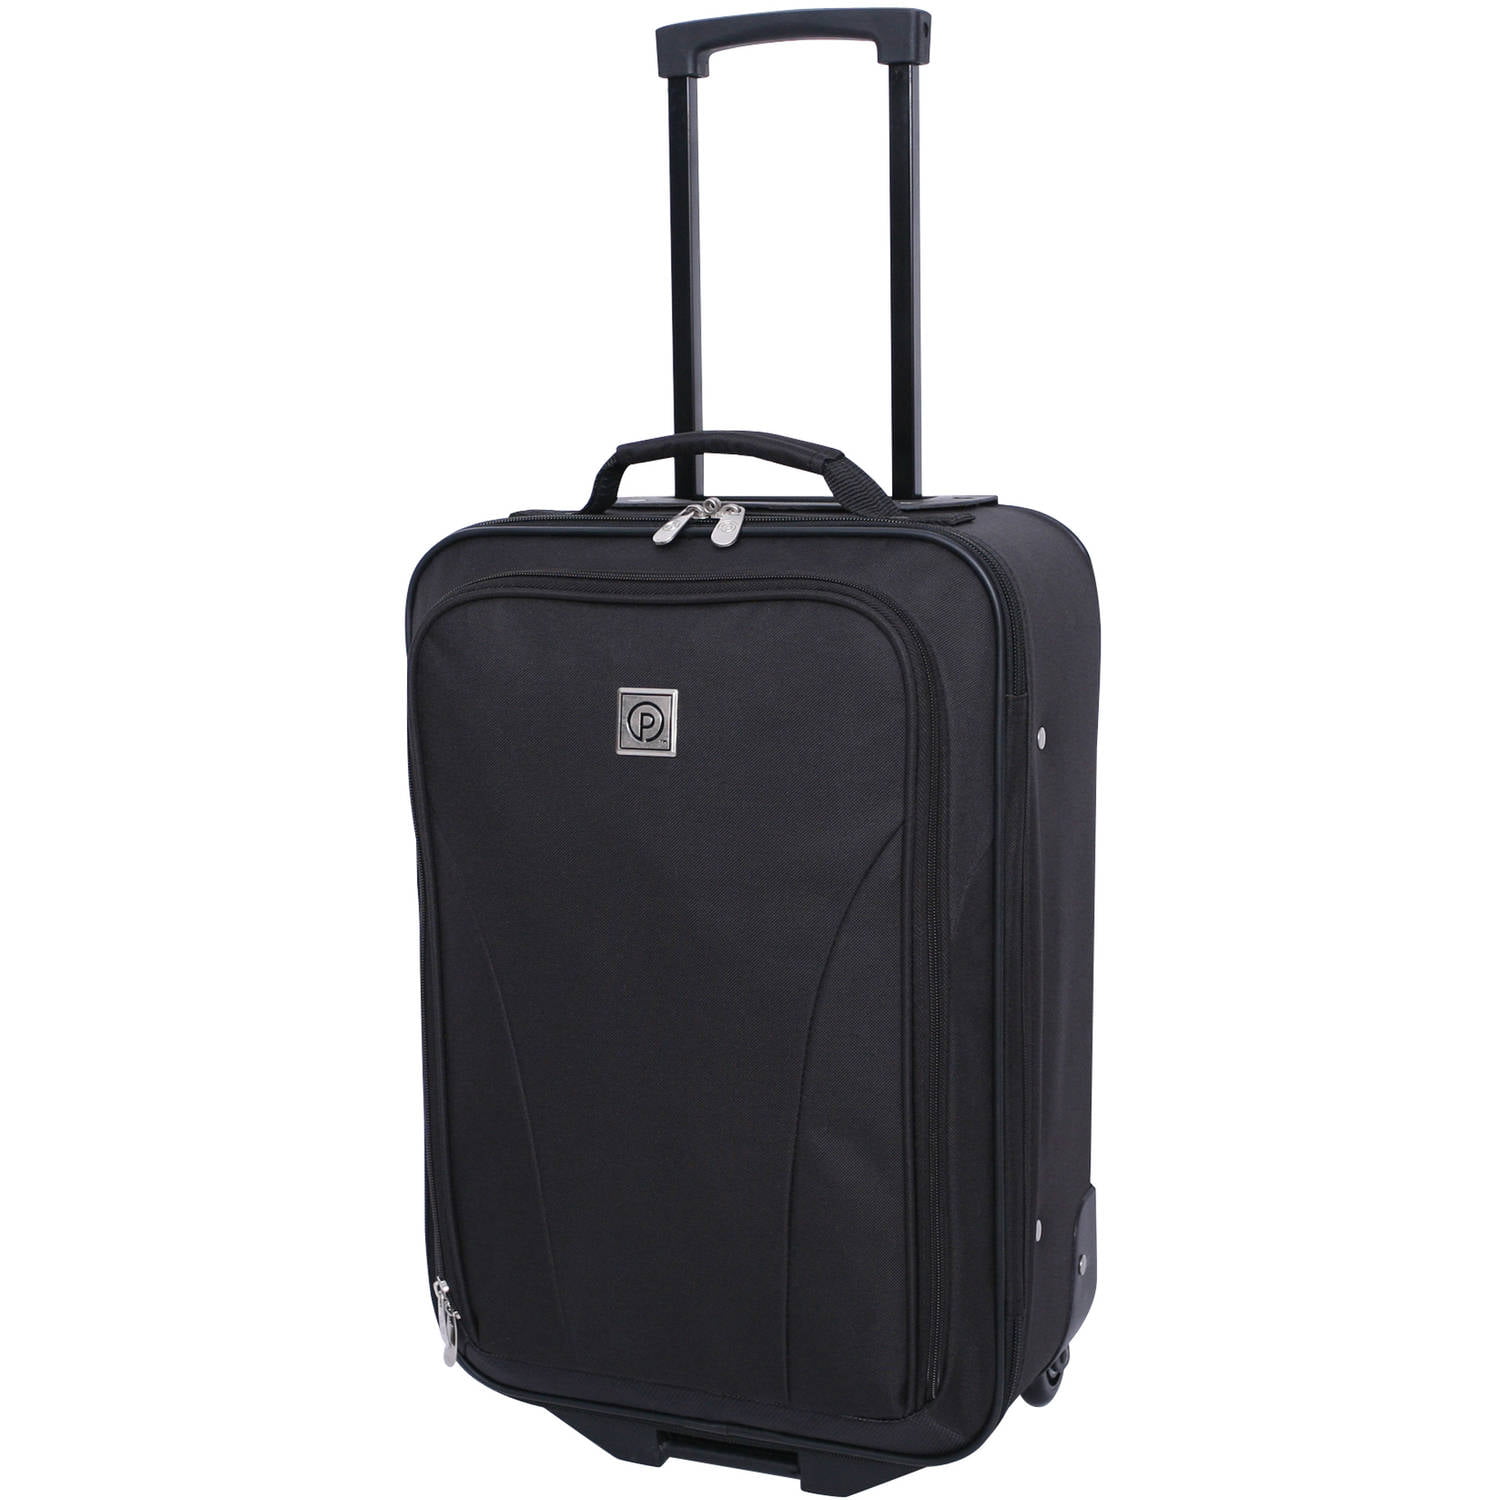 Cheap Carry On Luggage With Wheels - Mc Luggage